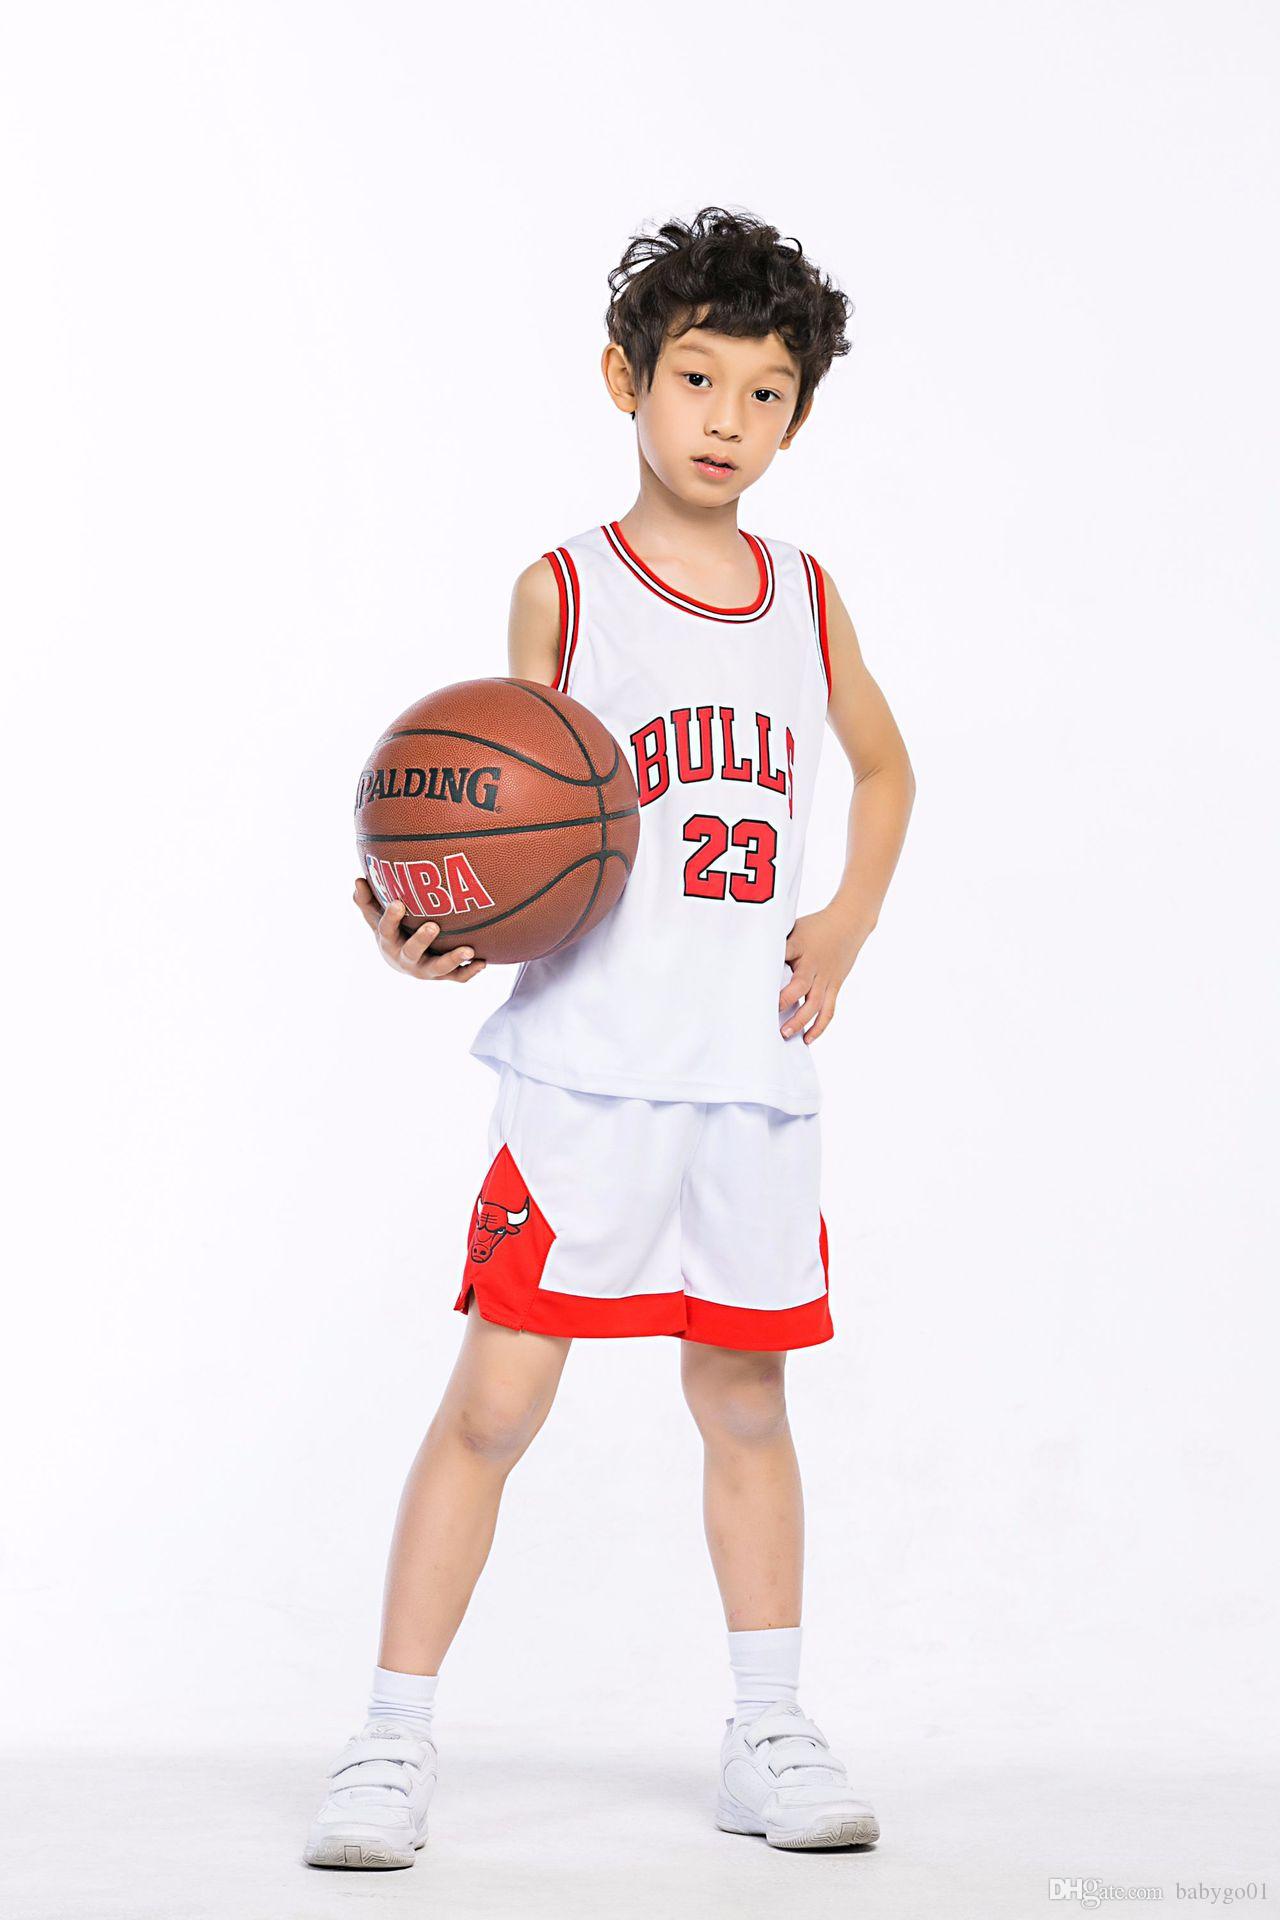 

kids basketball jersey for boys toddler preschool basketball jersey t-shirt et shorts youth small cheap customized, The first ten buyer free to get it